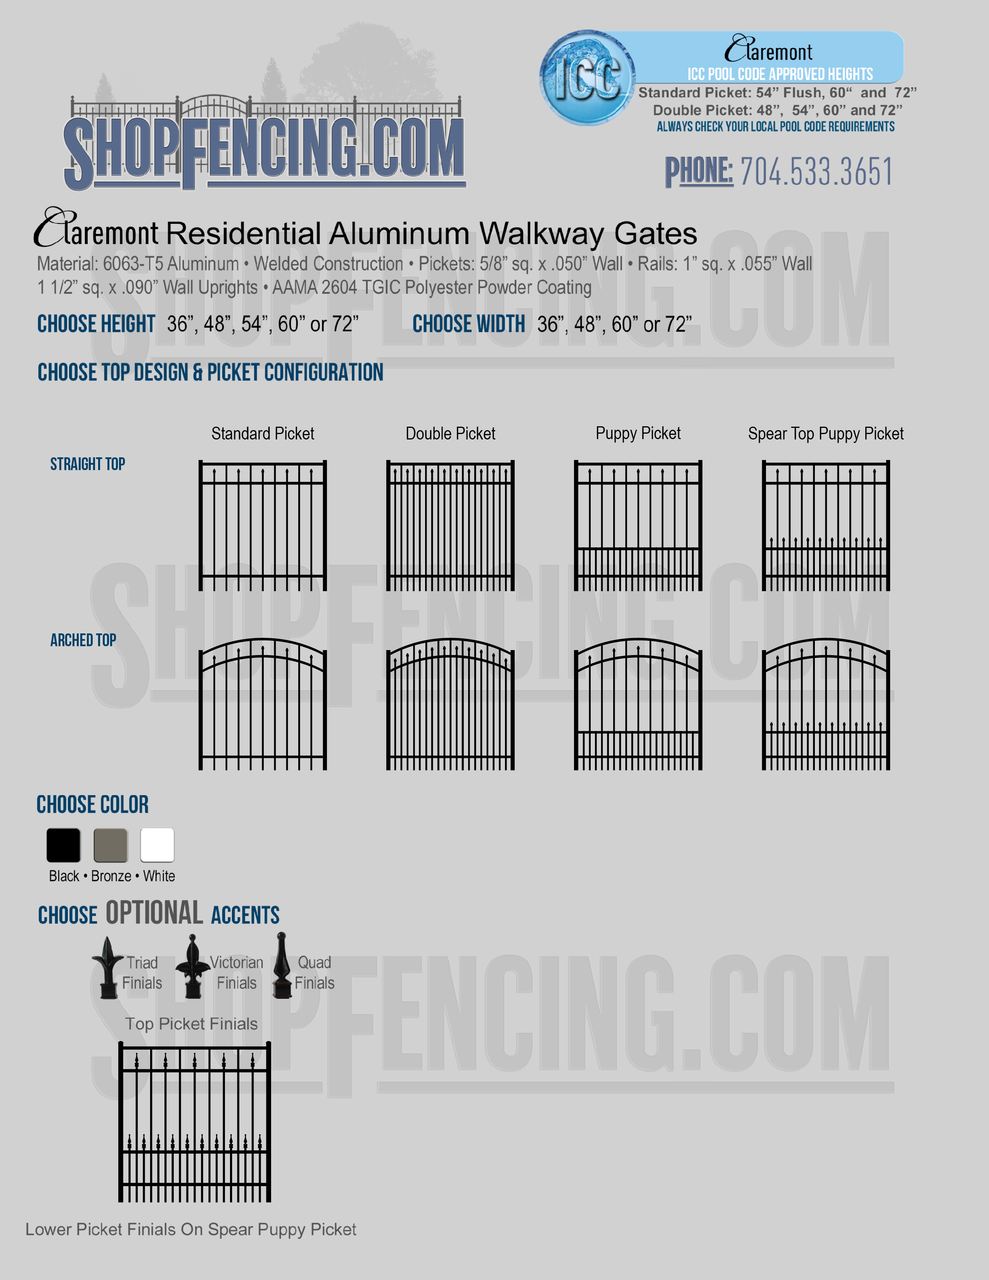 Residential Claremont  Aluminum Walkway Gates From ShopFencing.com